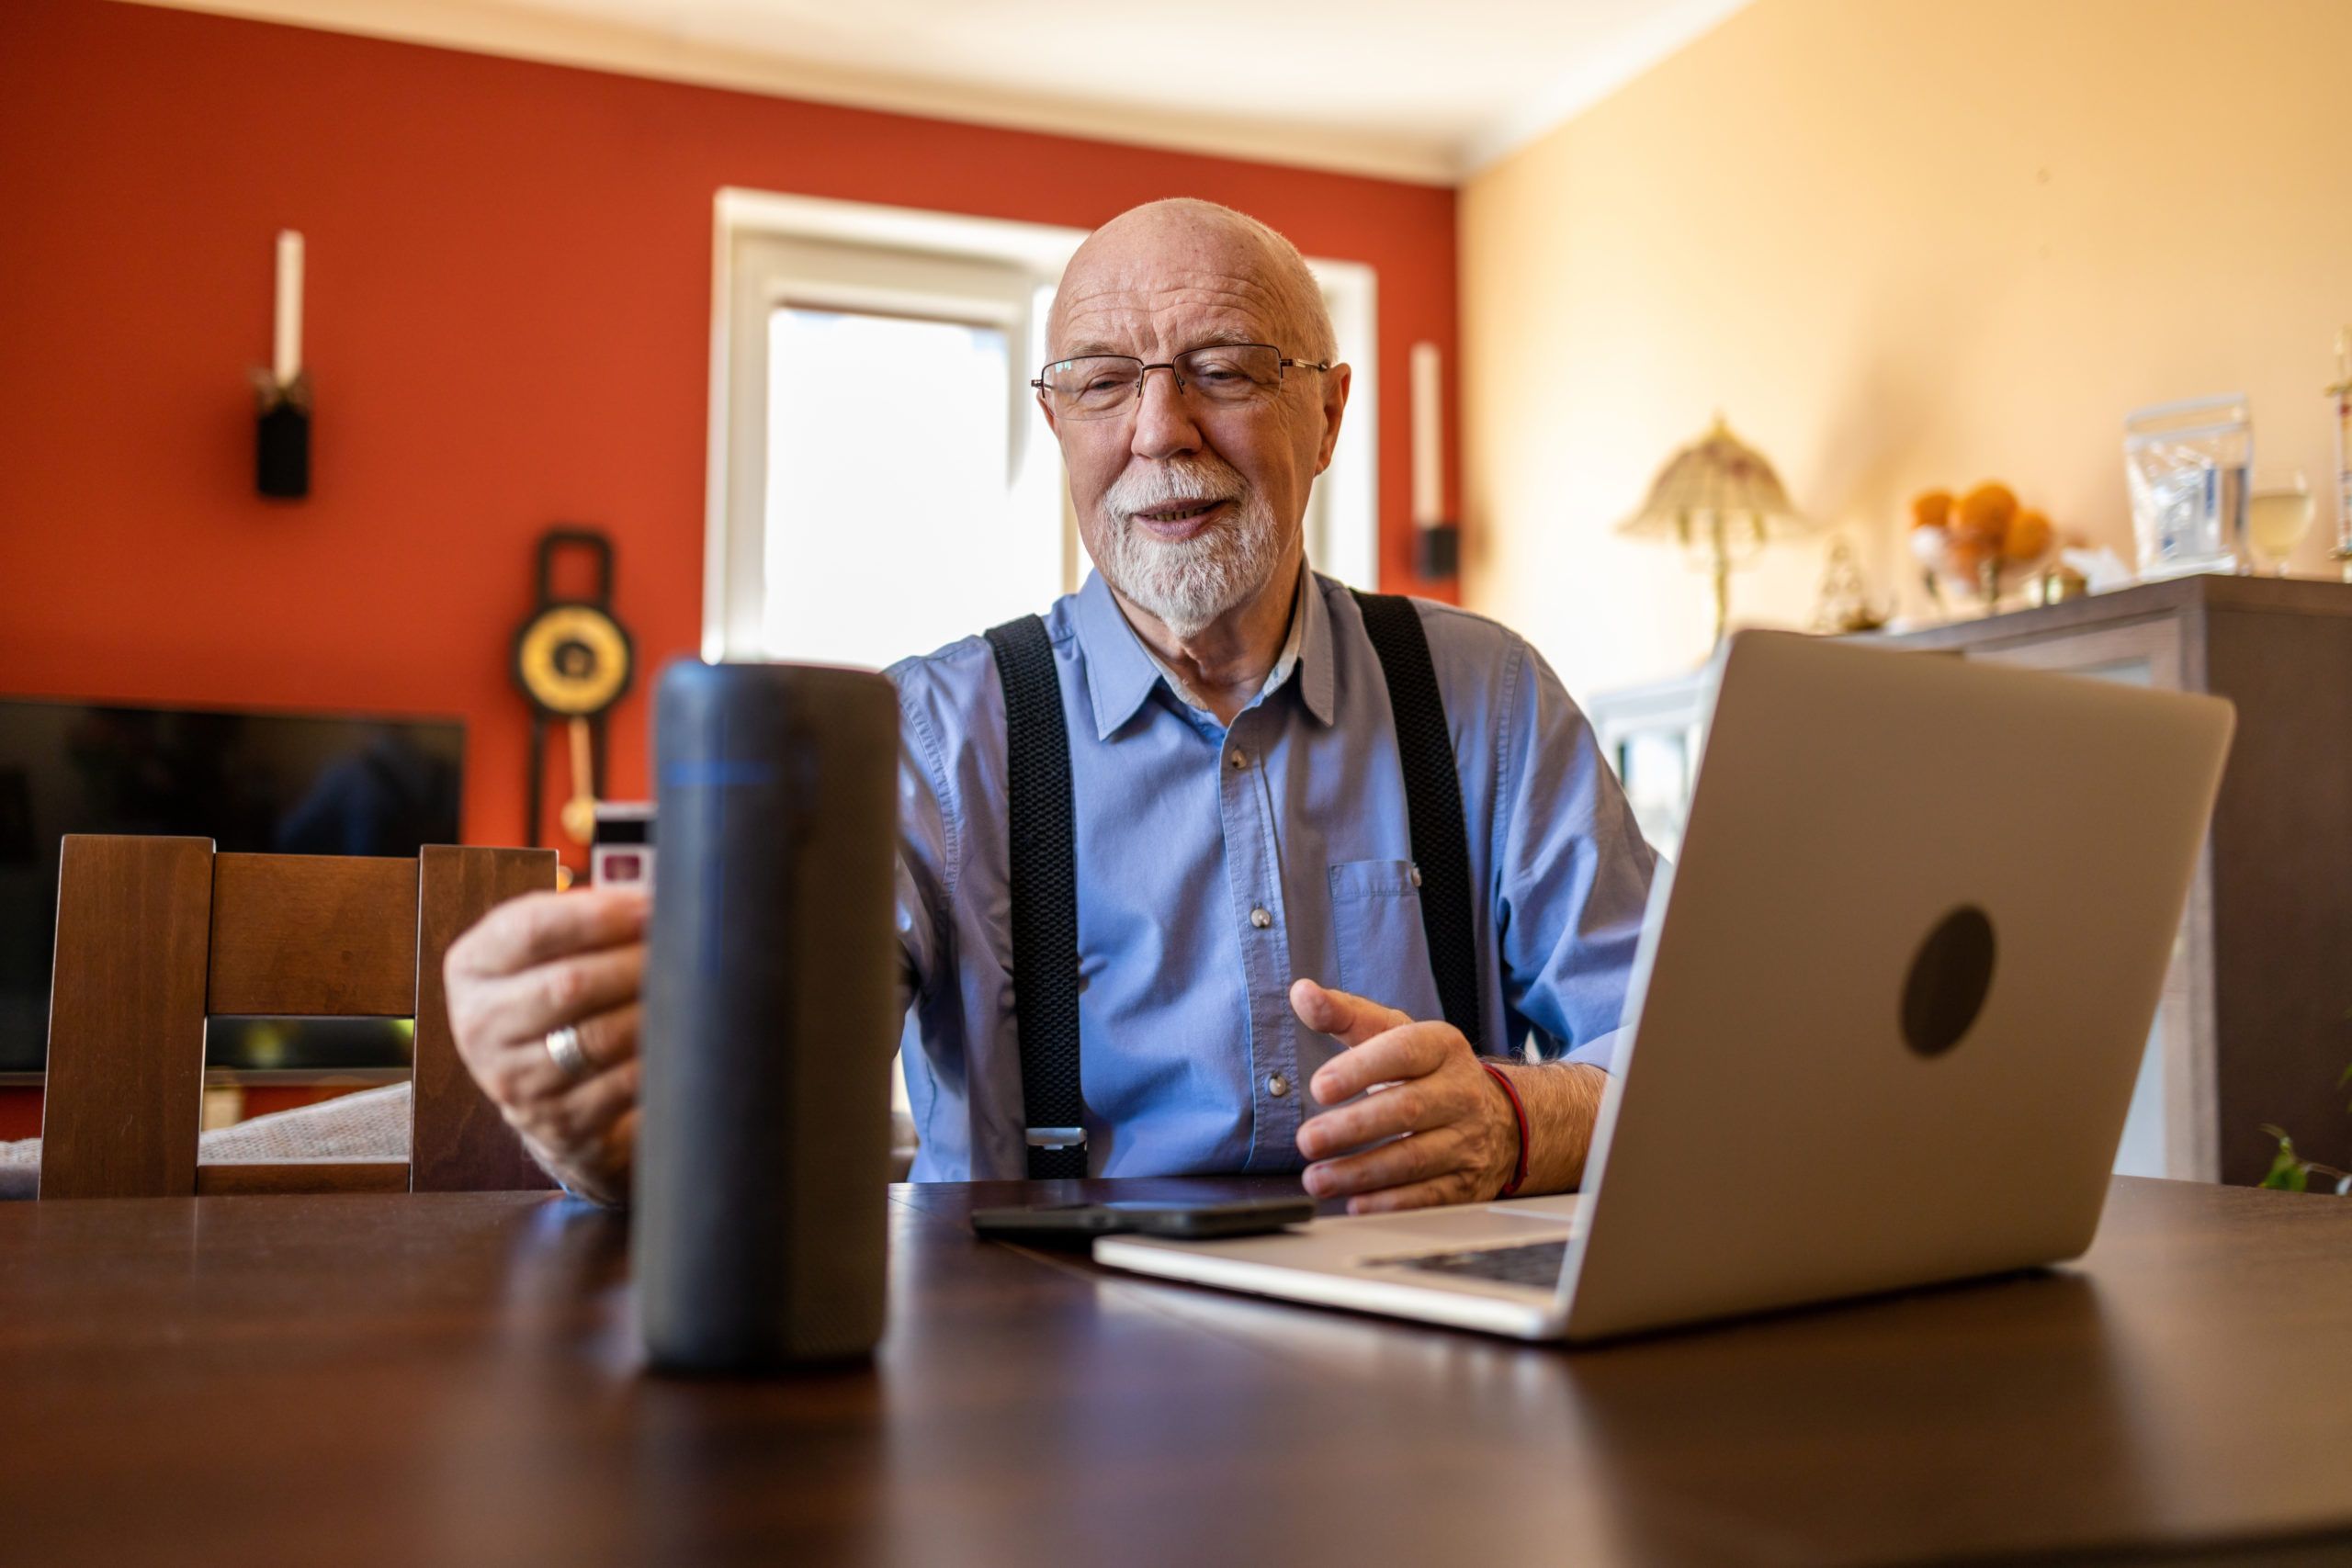 Older man at computer holding coffee mug. Cover image for article about communicating care using technology.